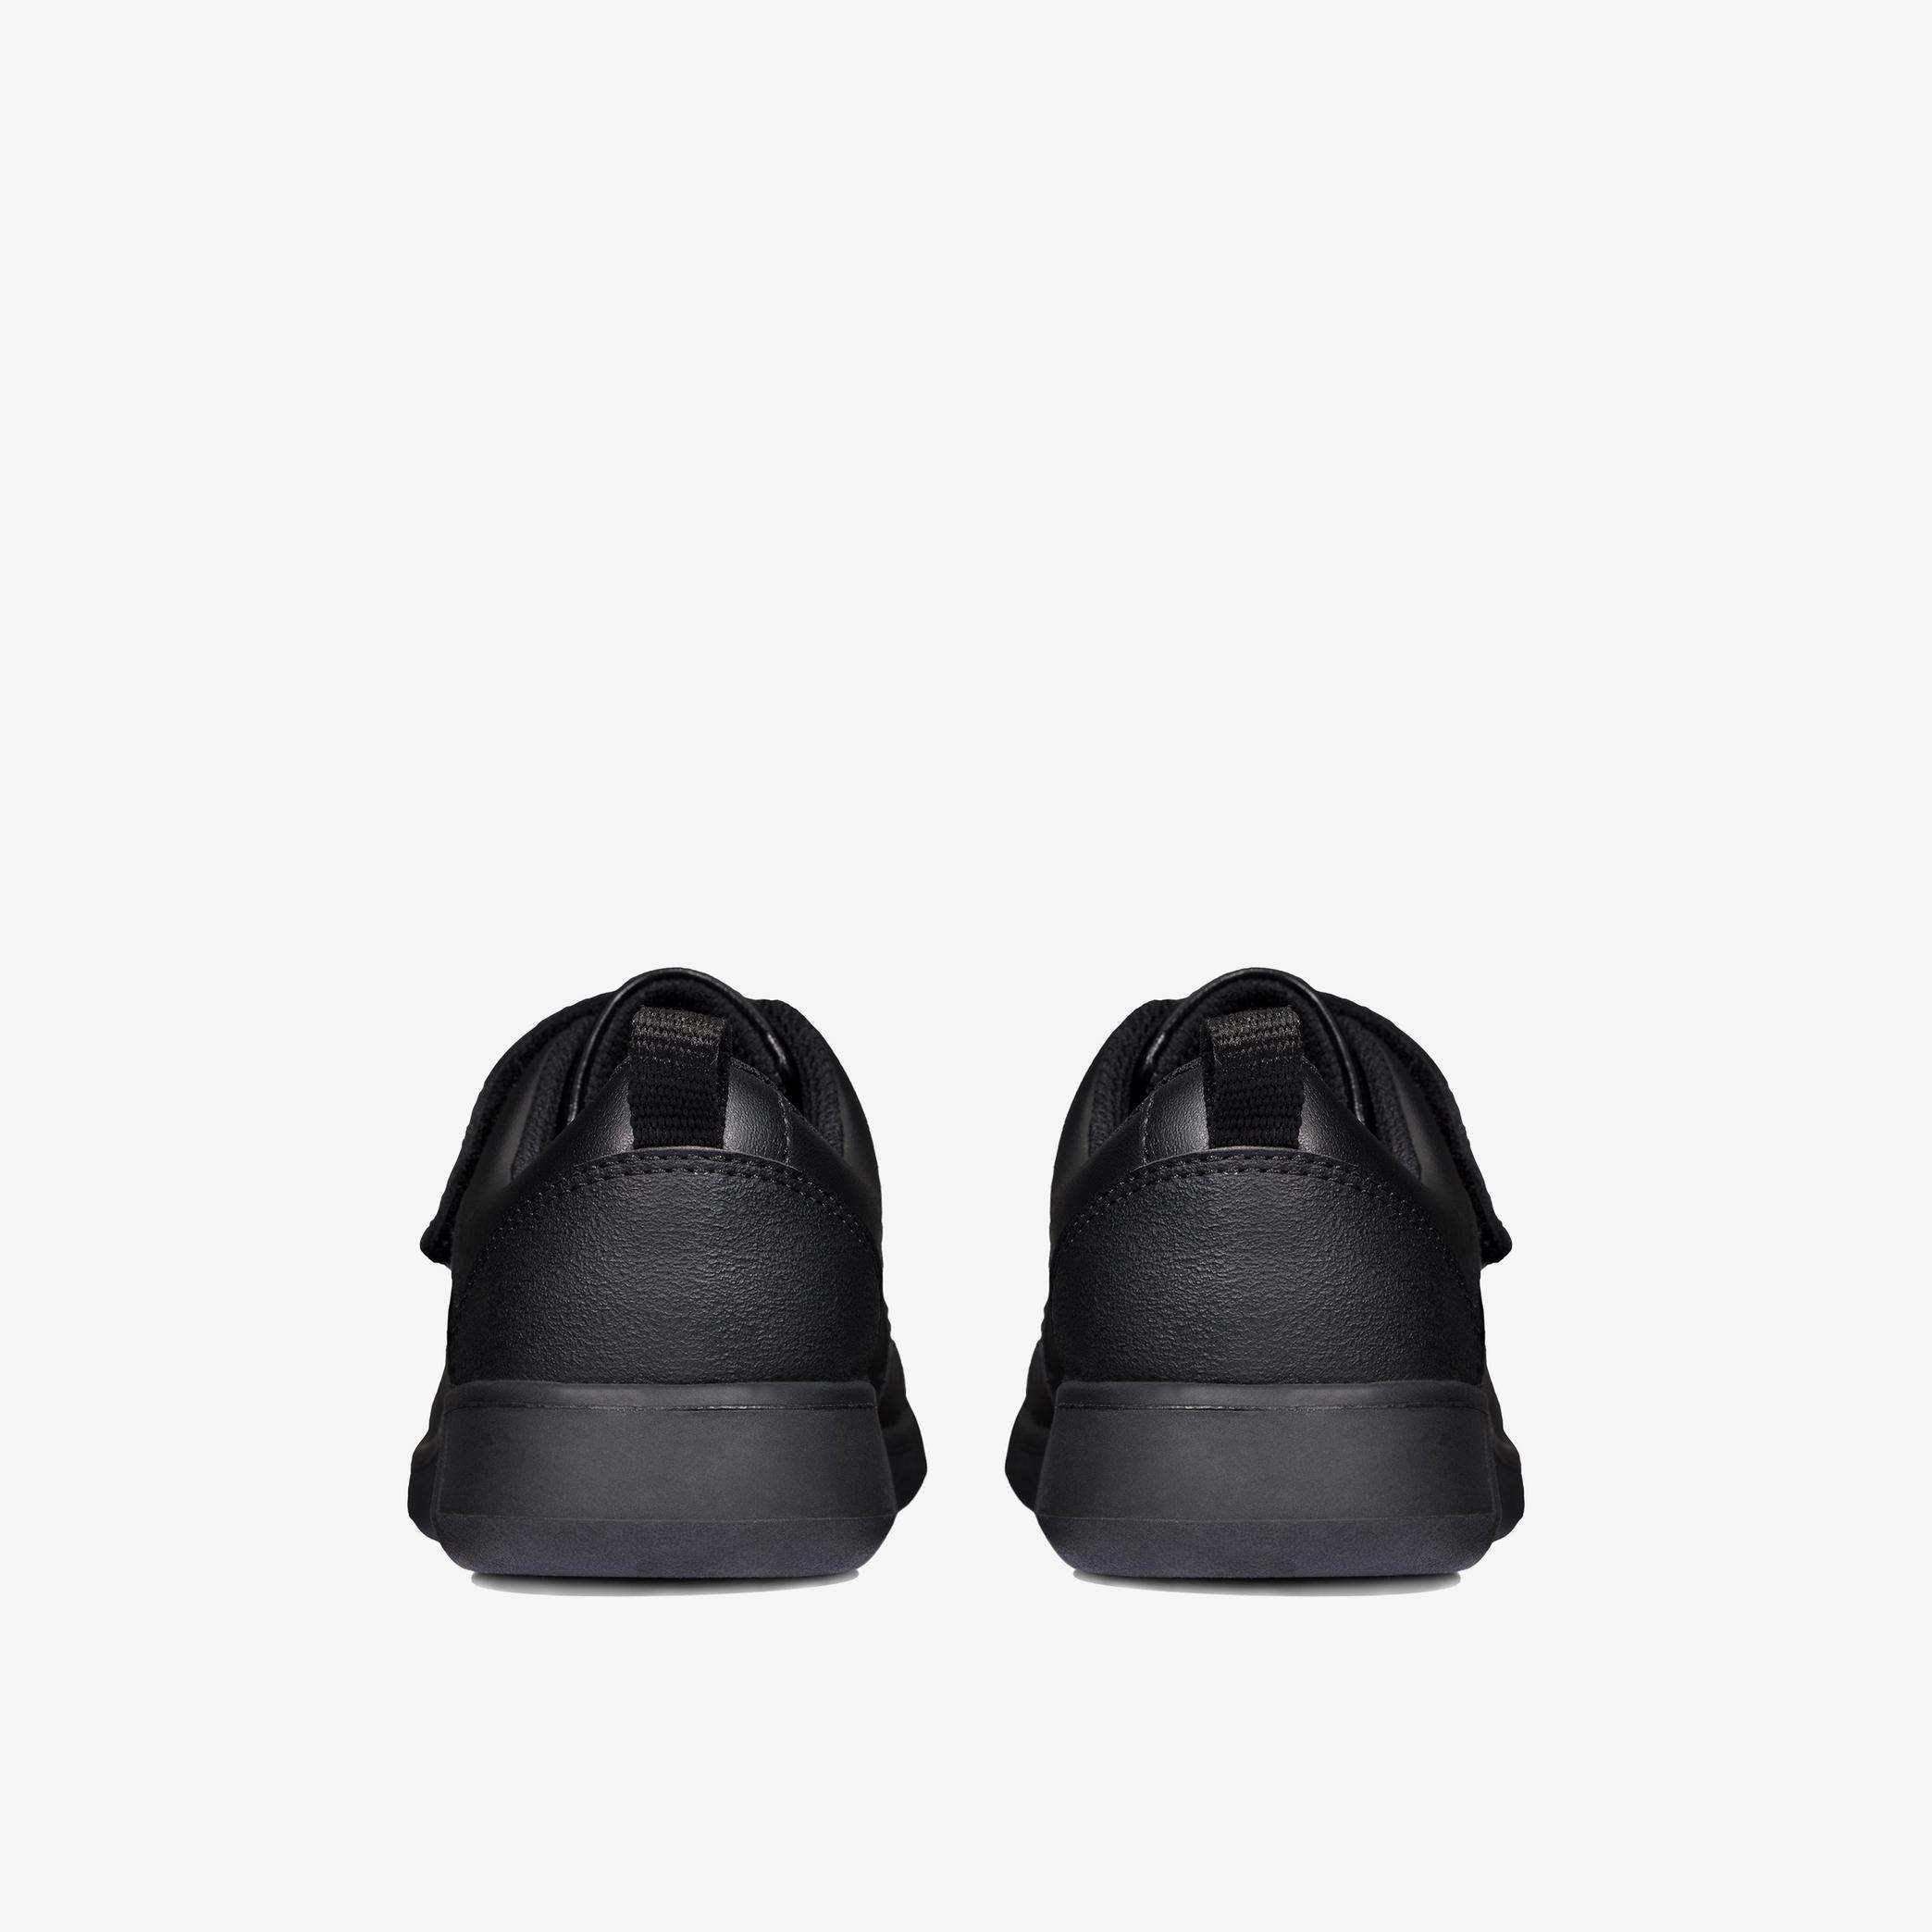 Boys Scape Sky Youth Black Leather Shoes | Clarks UK